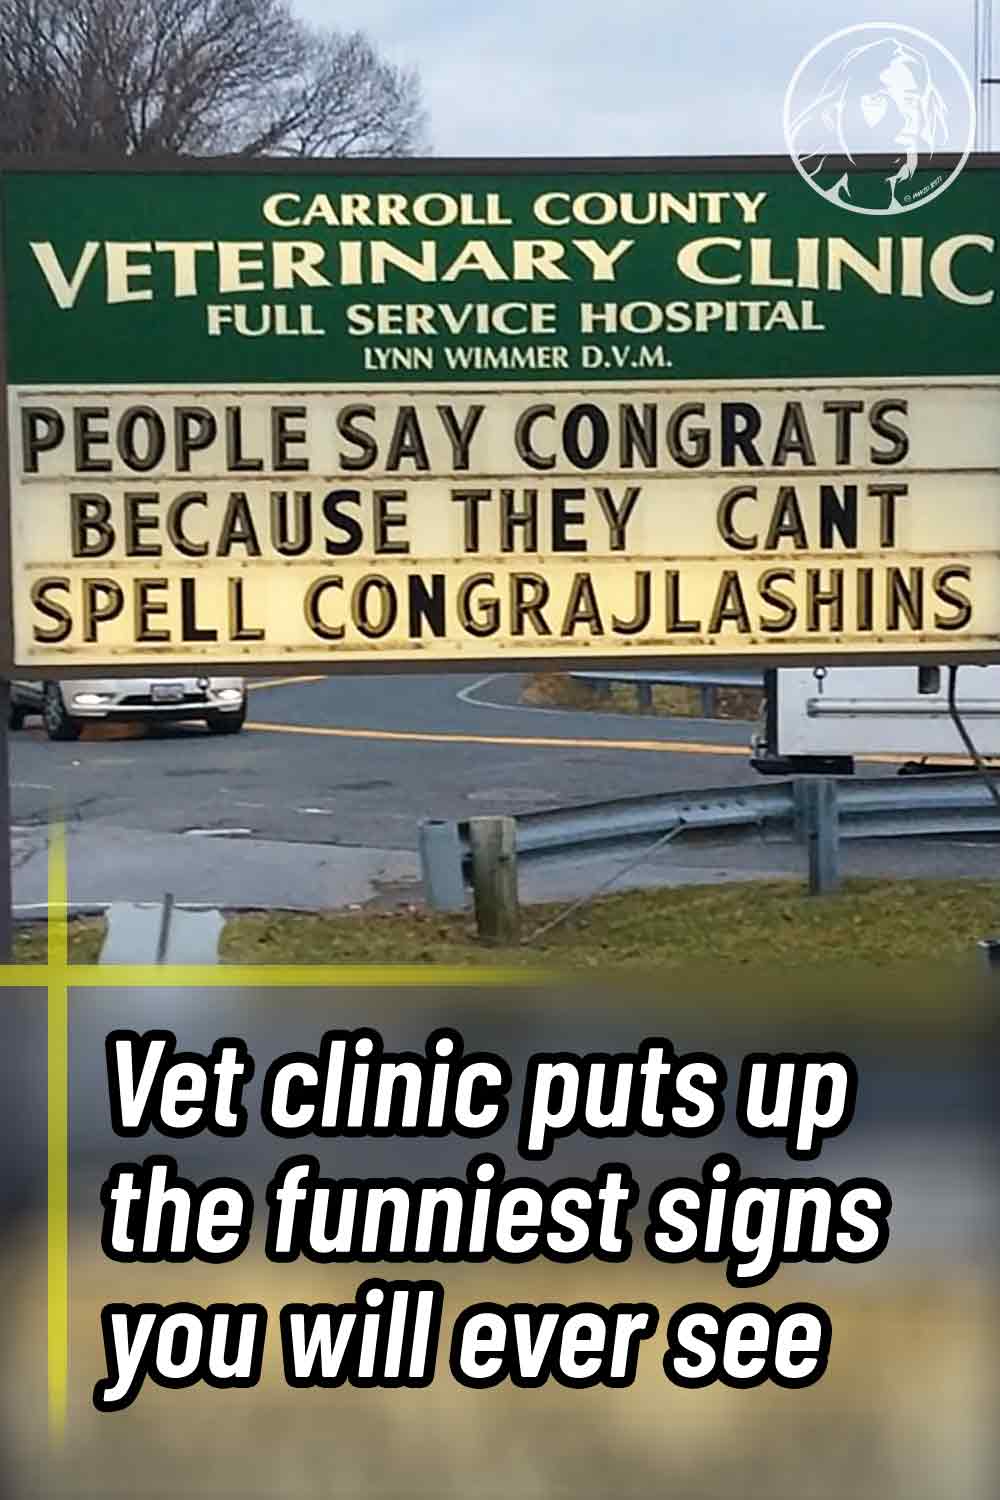 Vet clinic puts up the funniest signs you will ever see